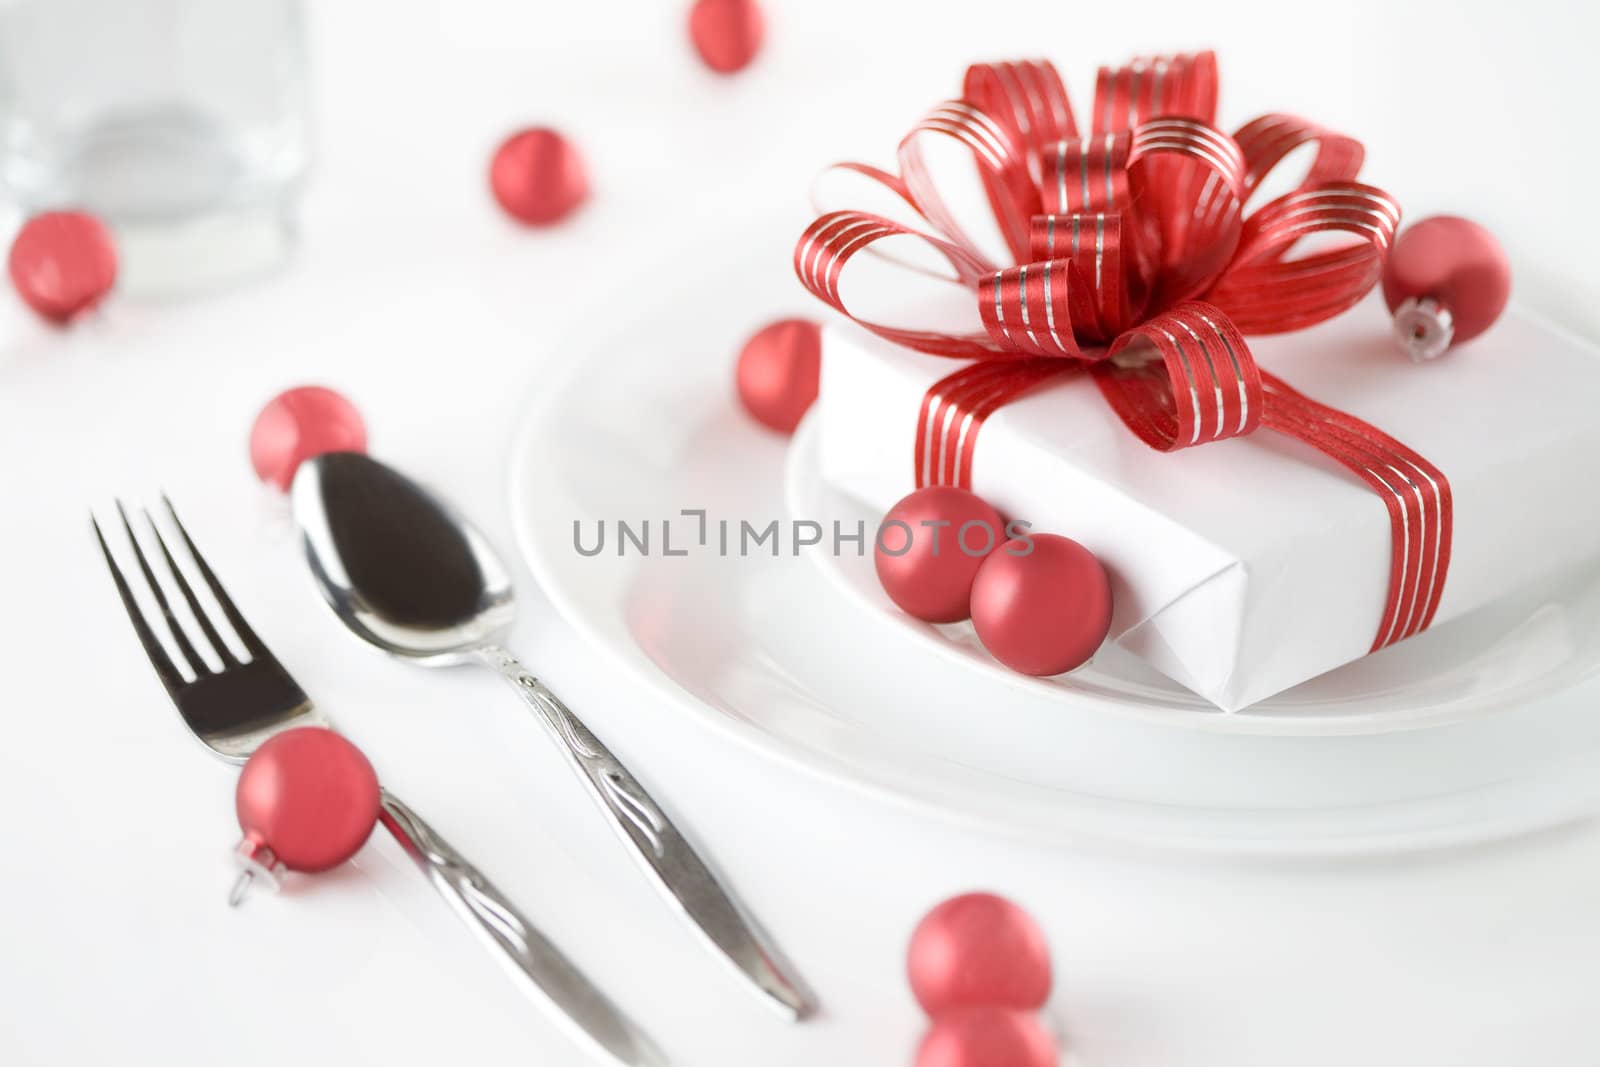 Gift on plate as table decorations by jarenwicklund